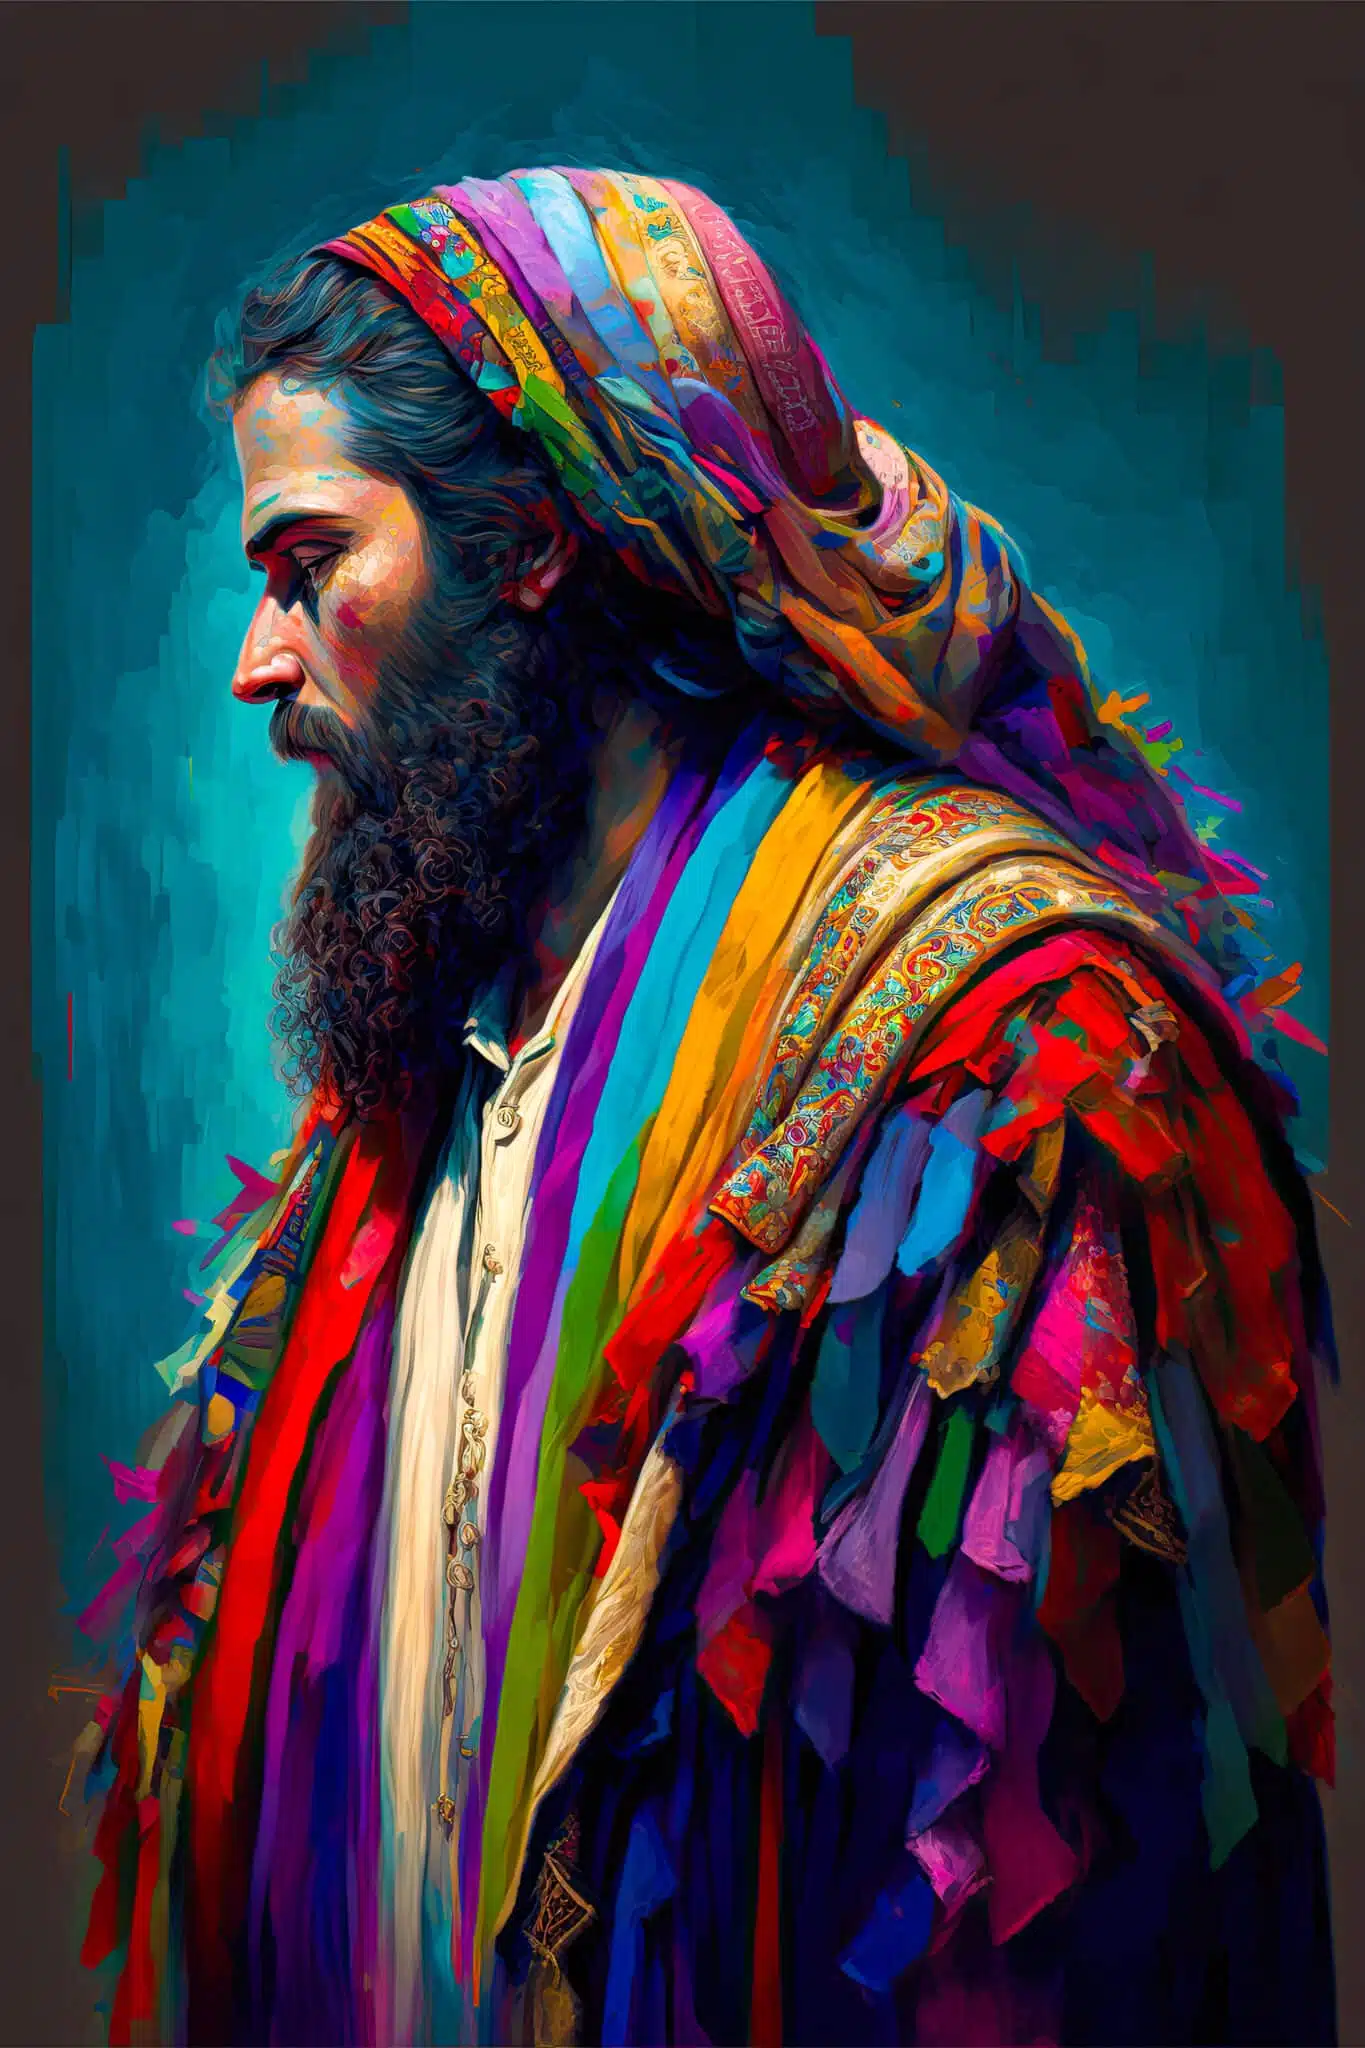 Joseph and the coat of many colors